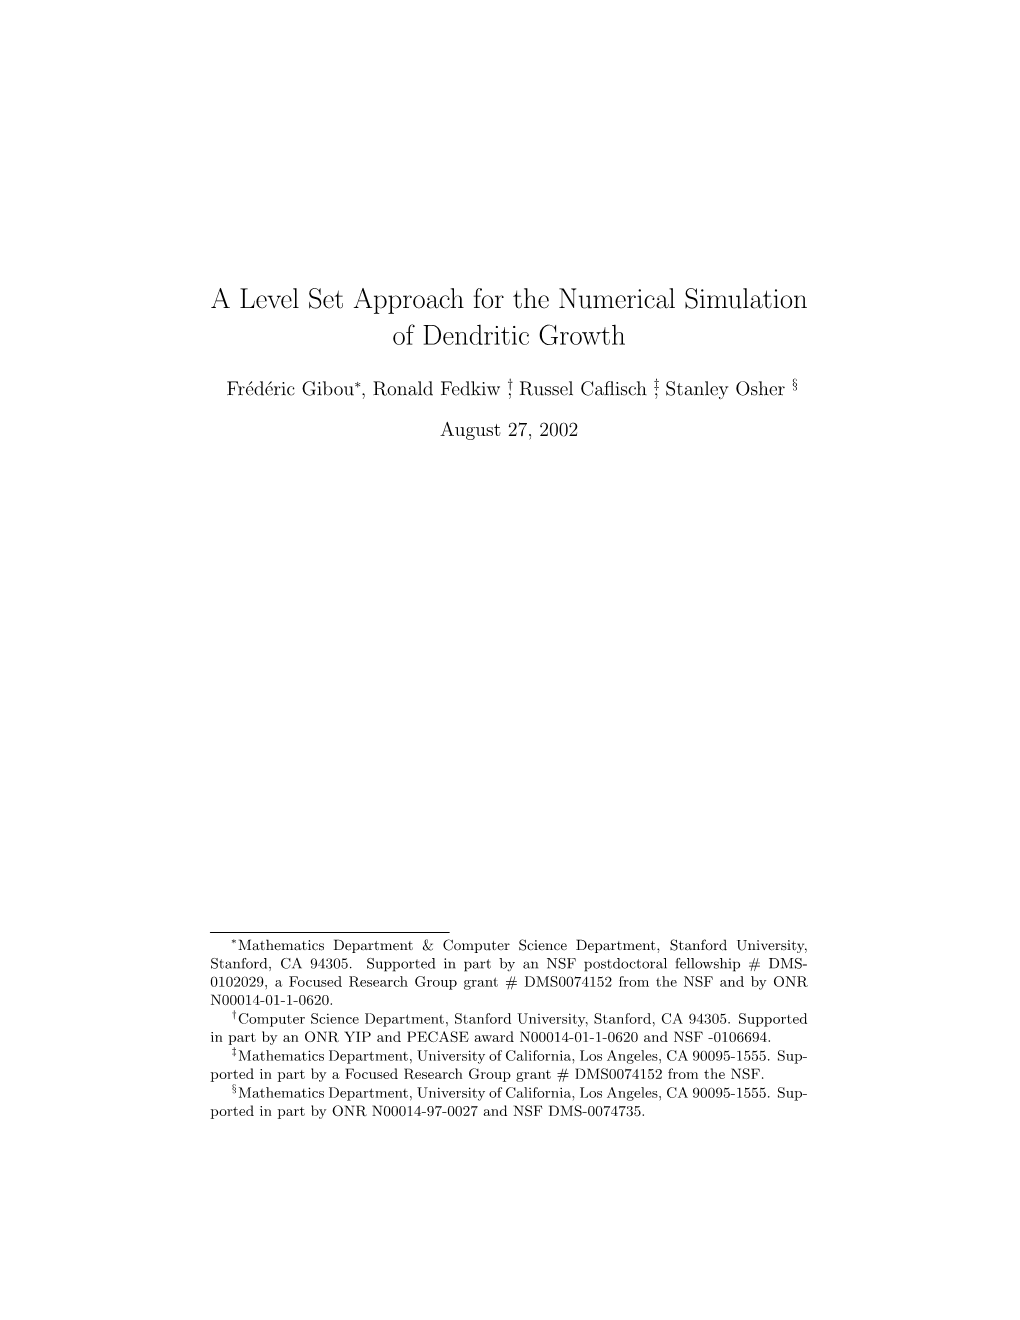 A Level Set Approach for the Numerical Simulation of Dendritic Growth